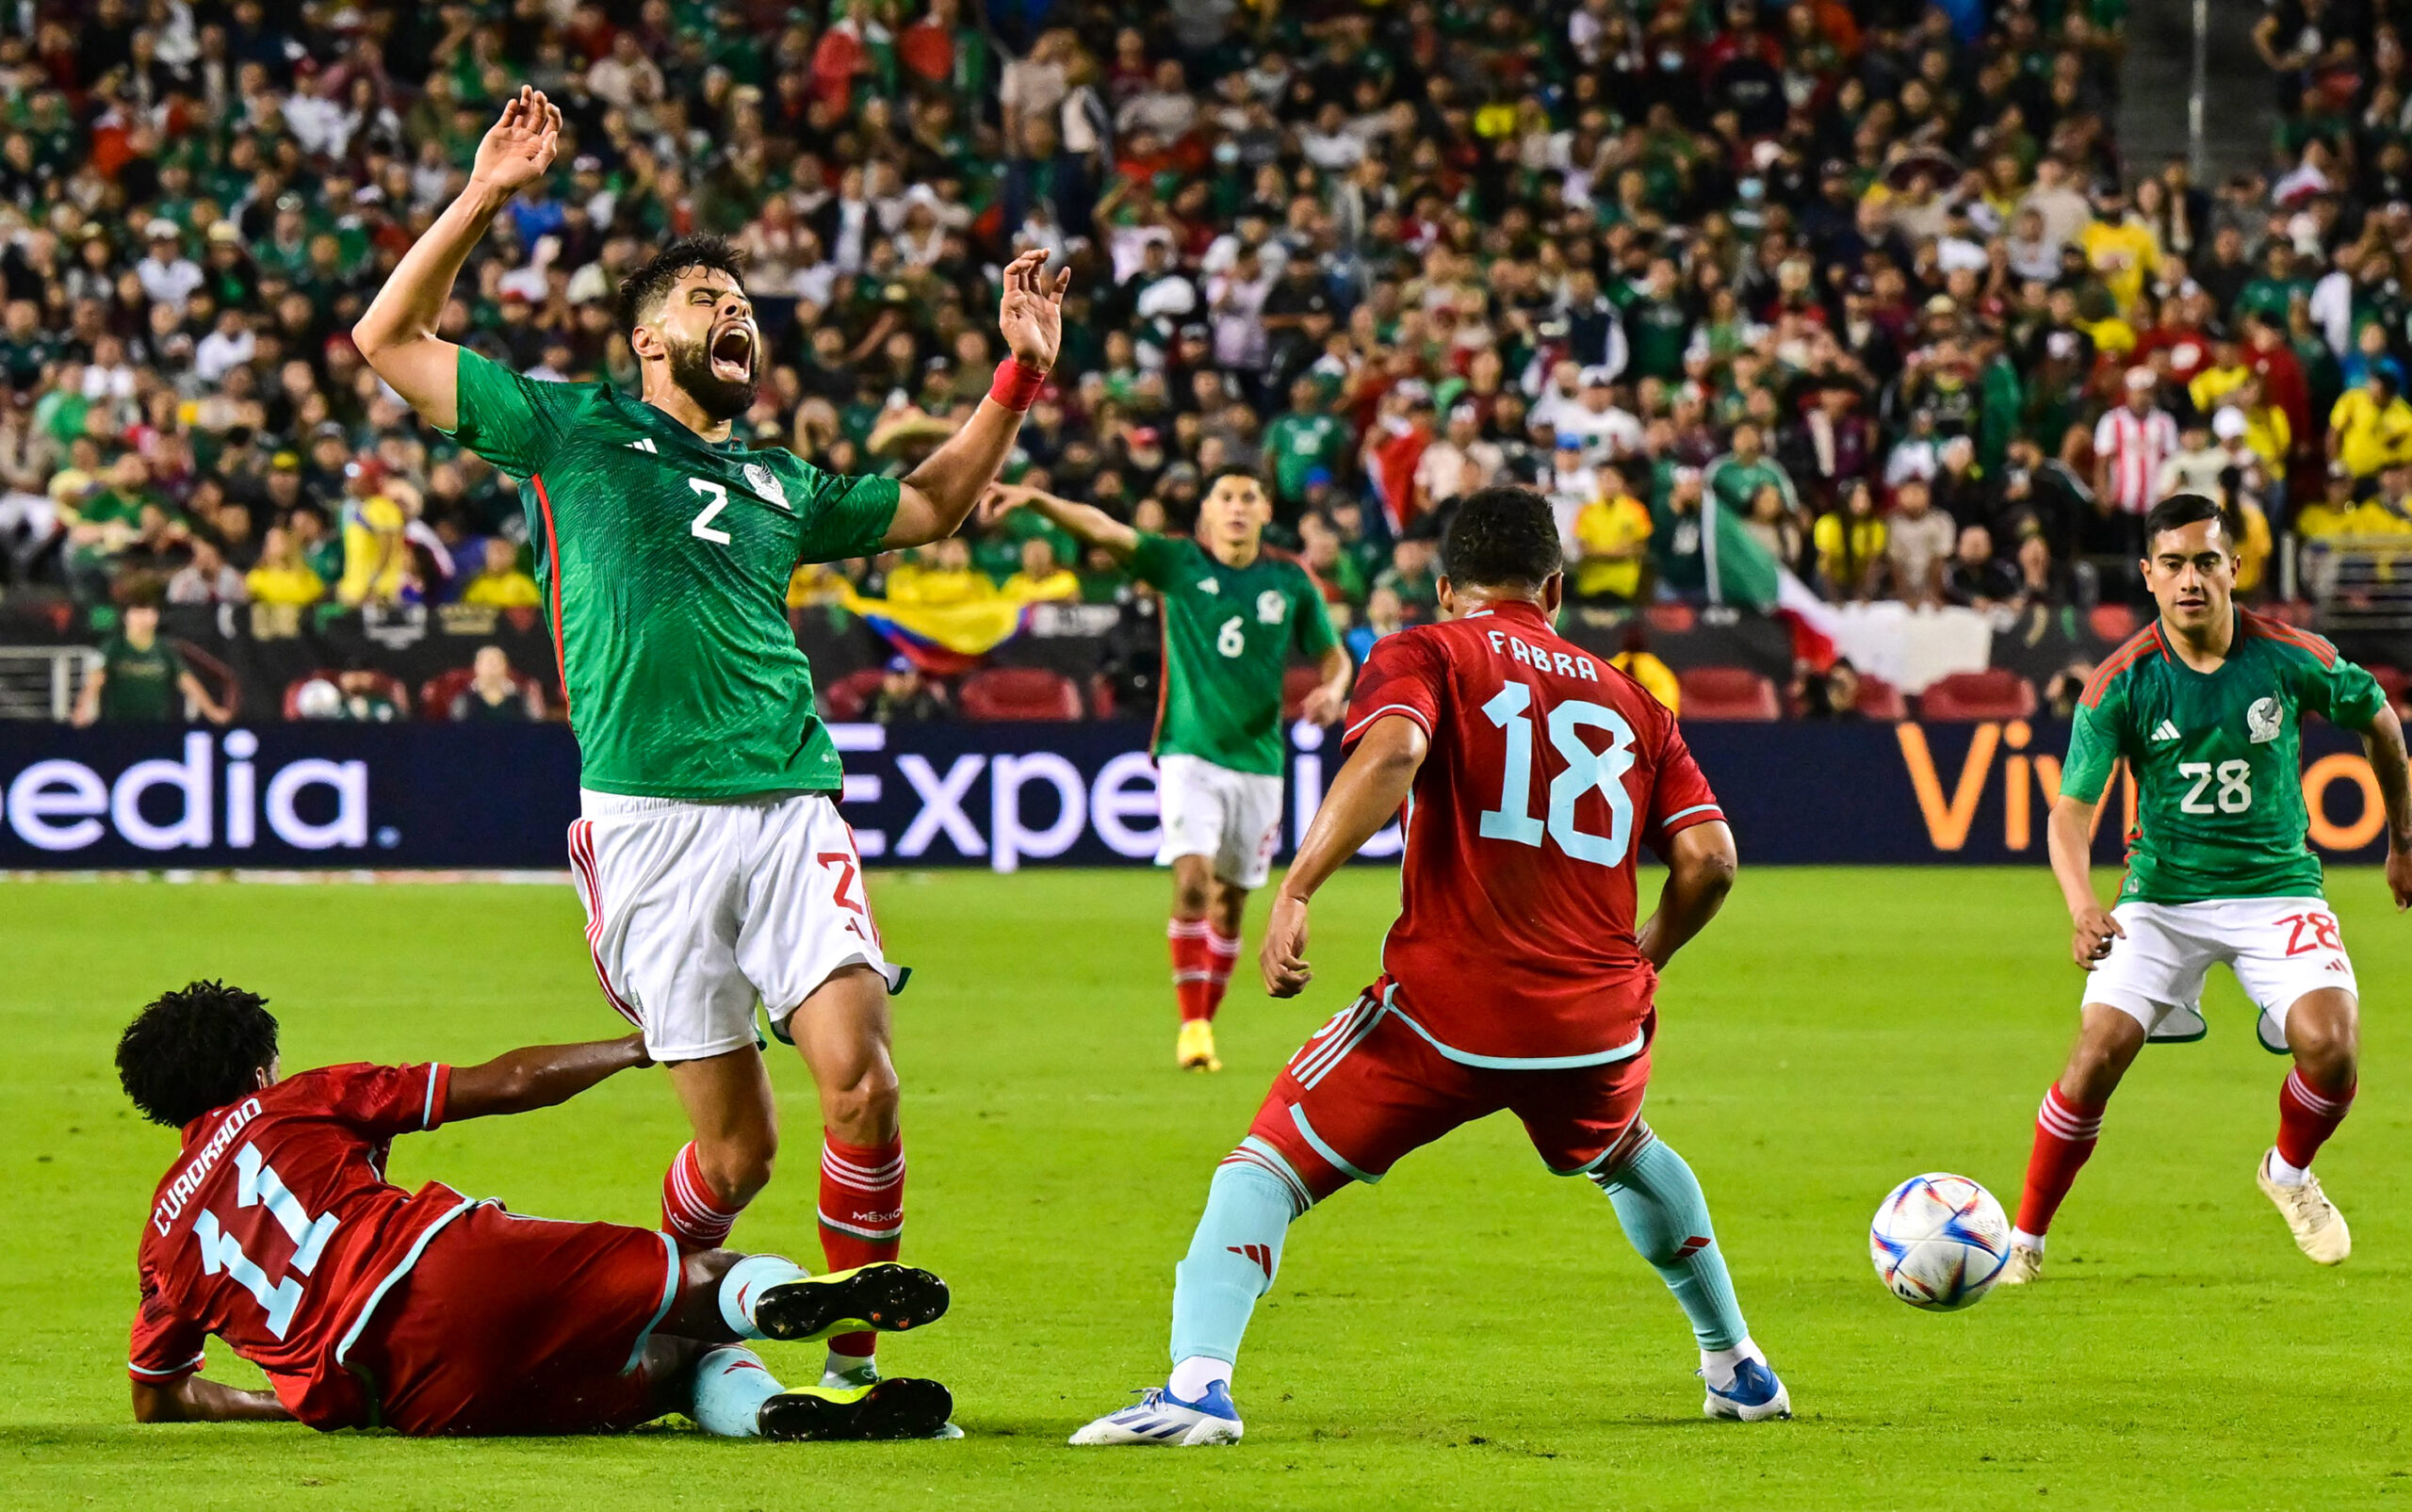 Mexico’s National Soccer Team Will Play At Levi’s Stadium This Summer